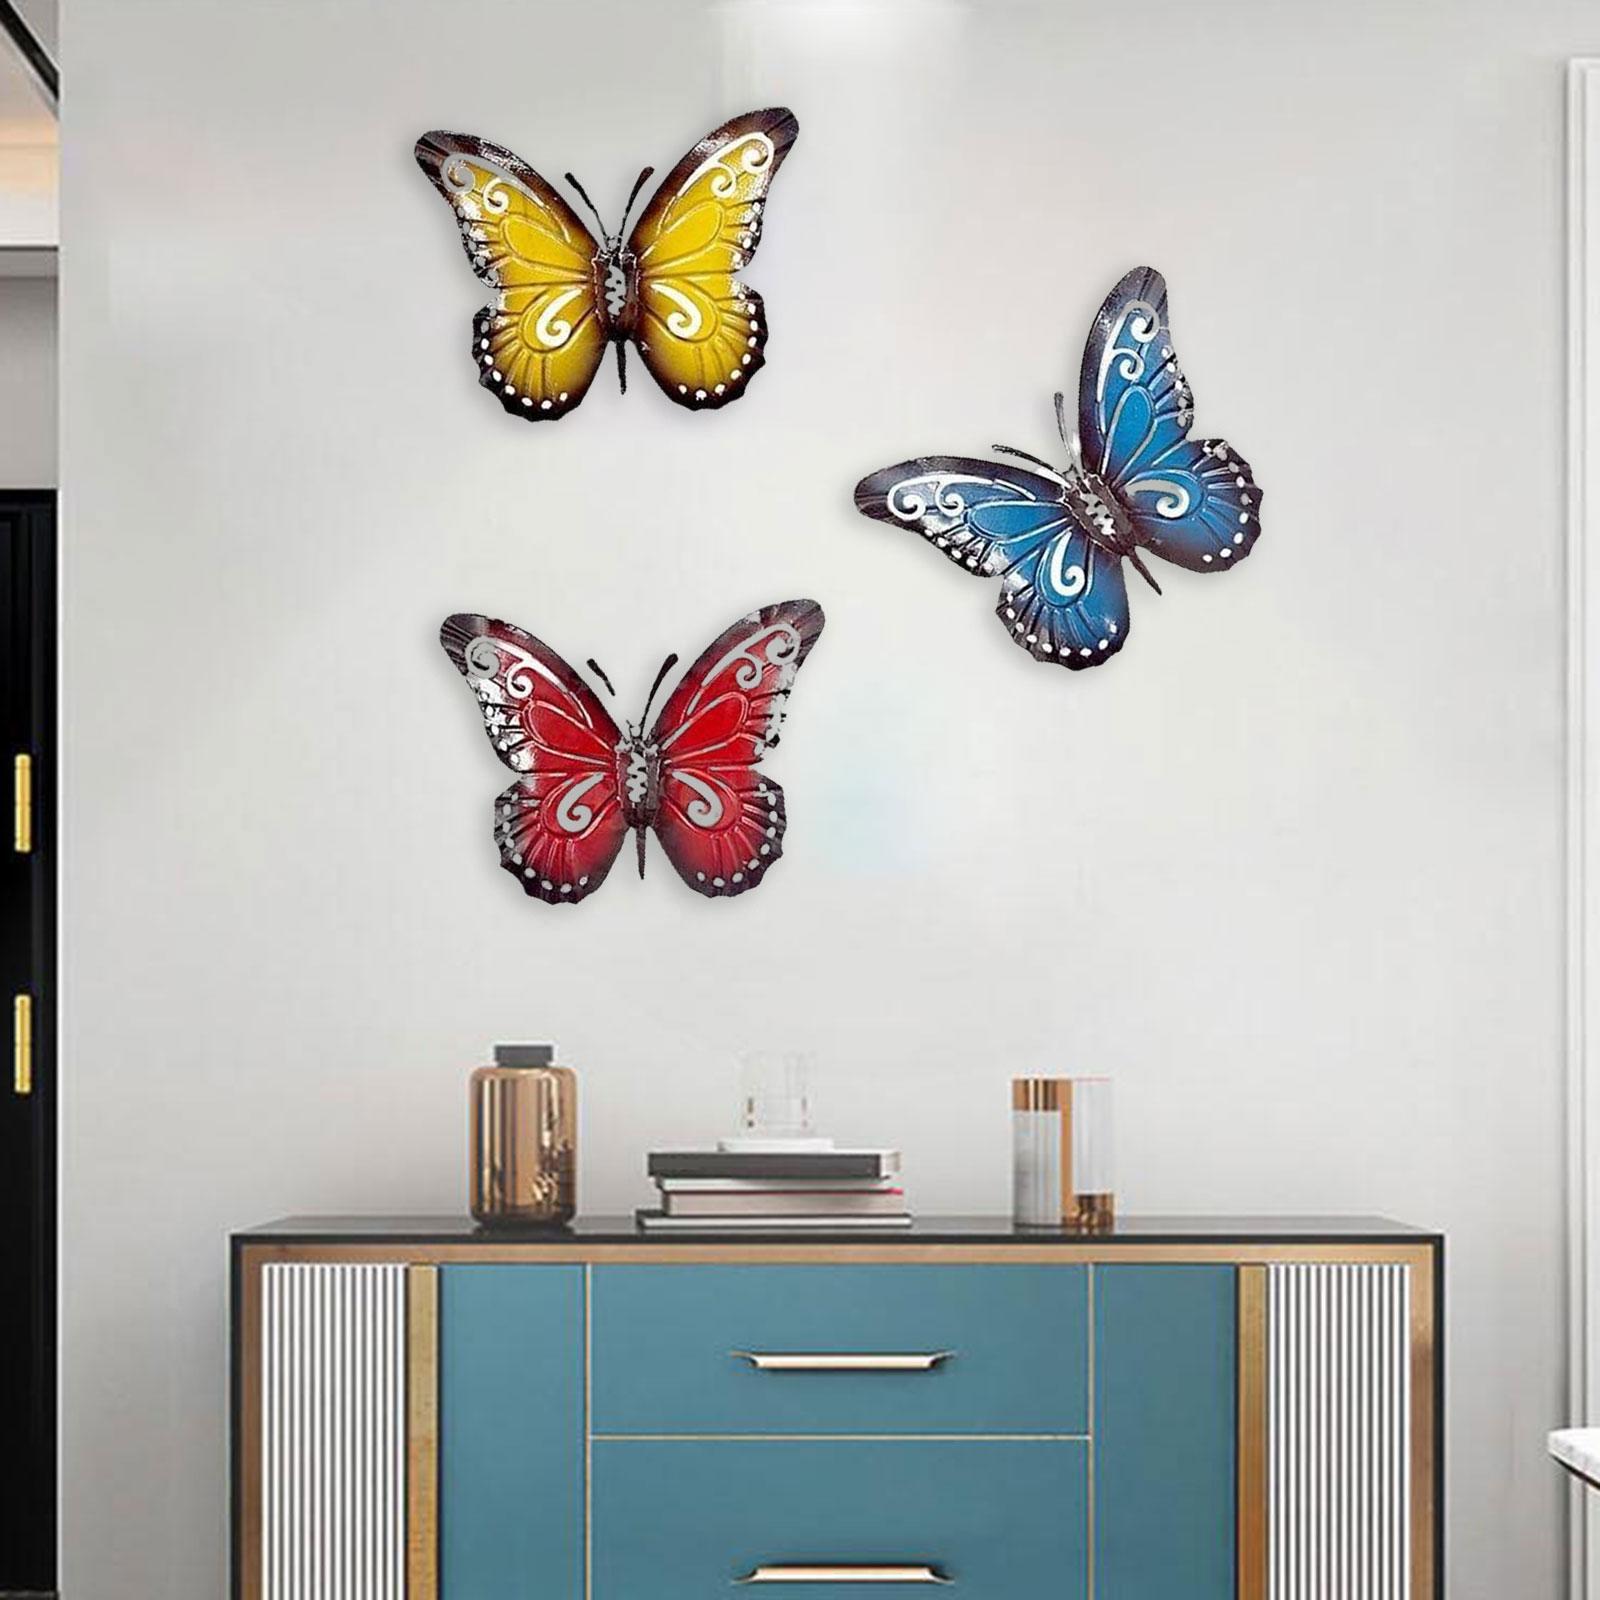 3x Modern Butterfly Wall Sculpture Decor Hanging for Home Porch Farmhouse